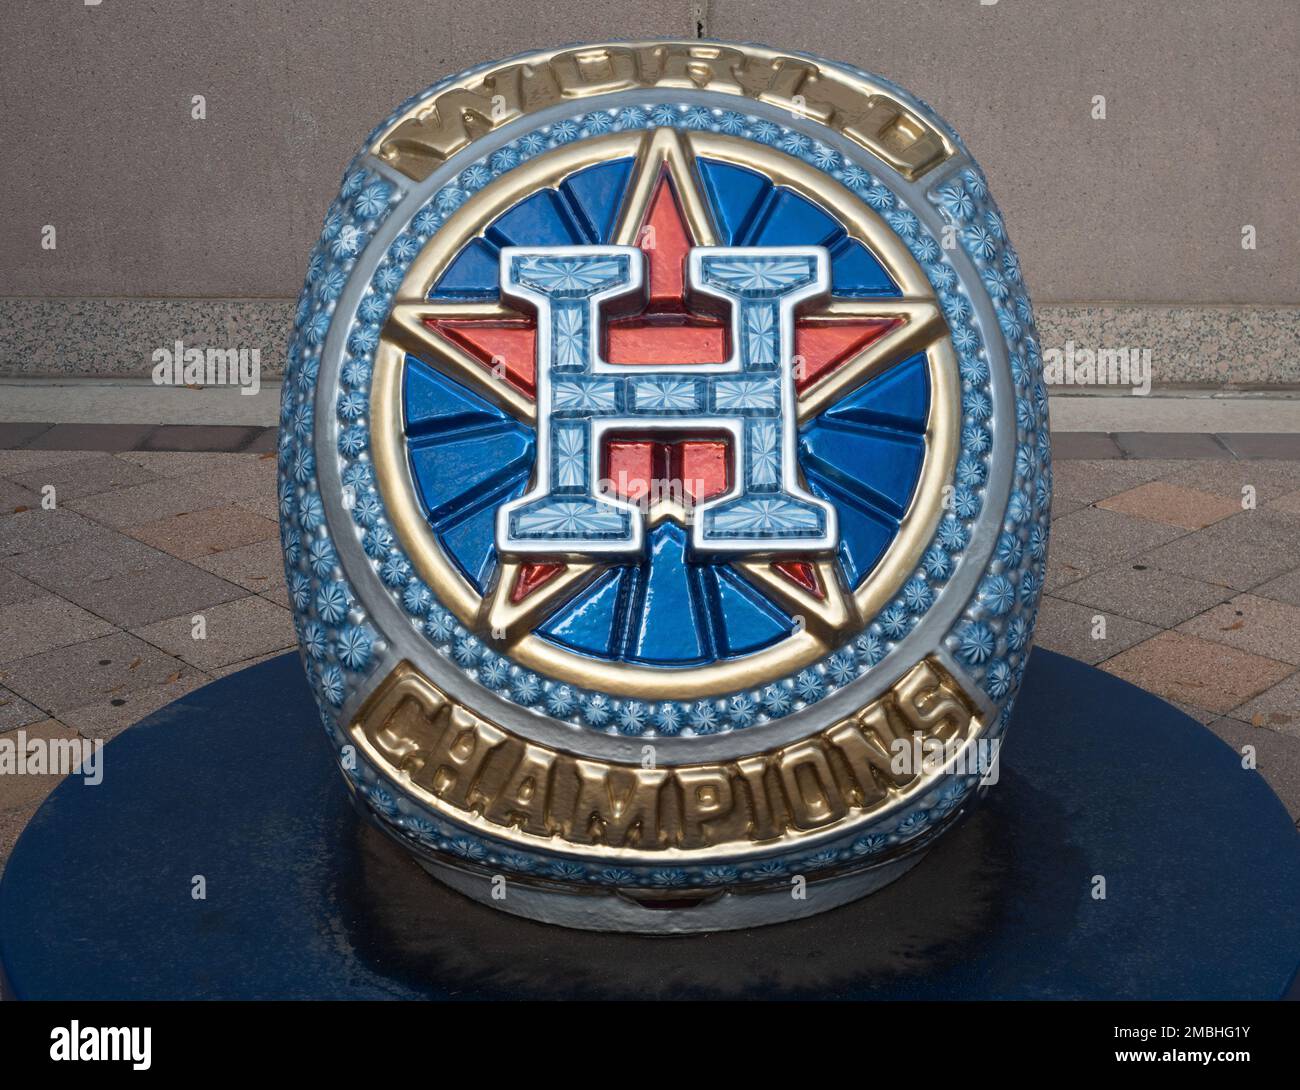 Spherical red, blue, and gold sculpture at Minute Maid Stadium that celebrates the Houston Astro's World Series win in 2017. Stock Photo